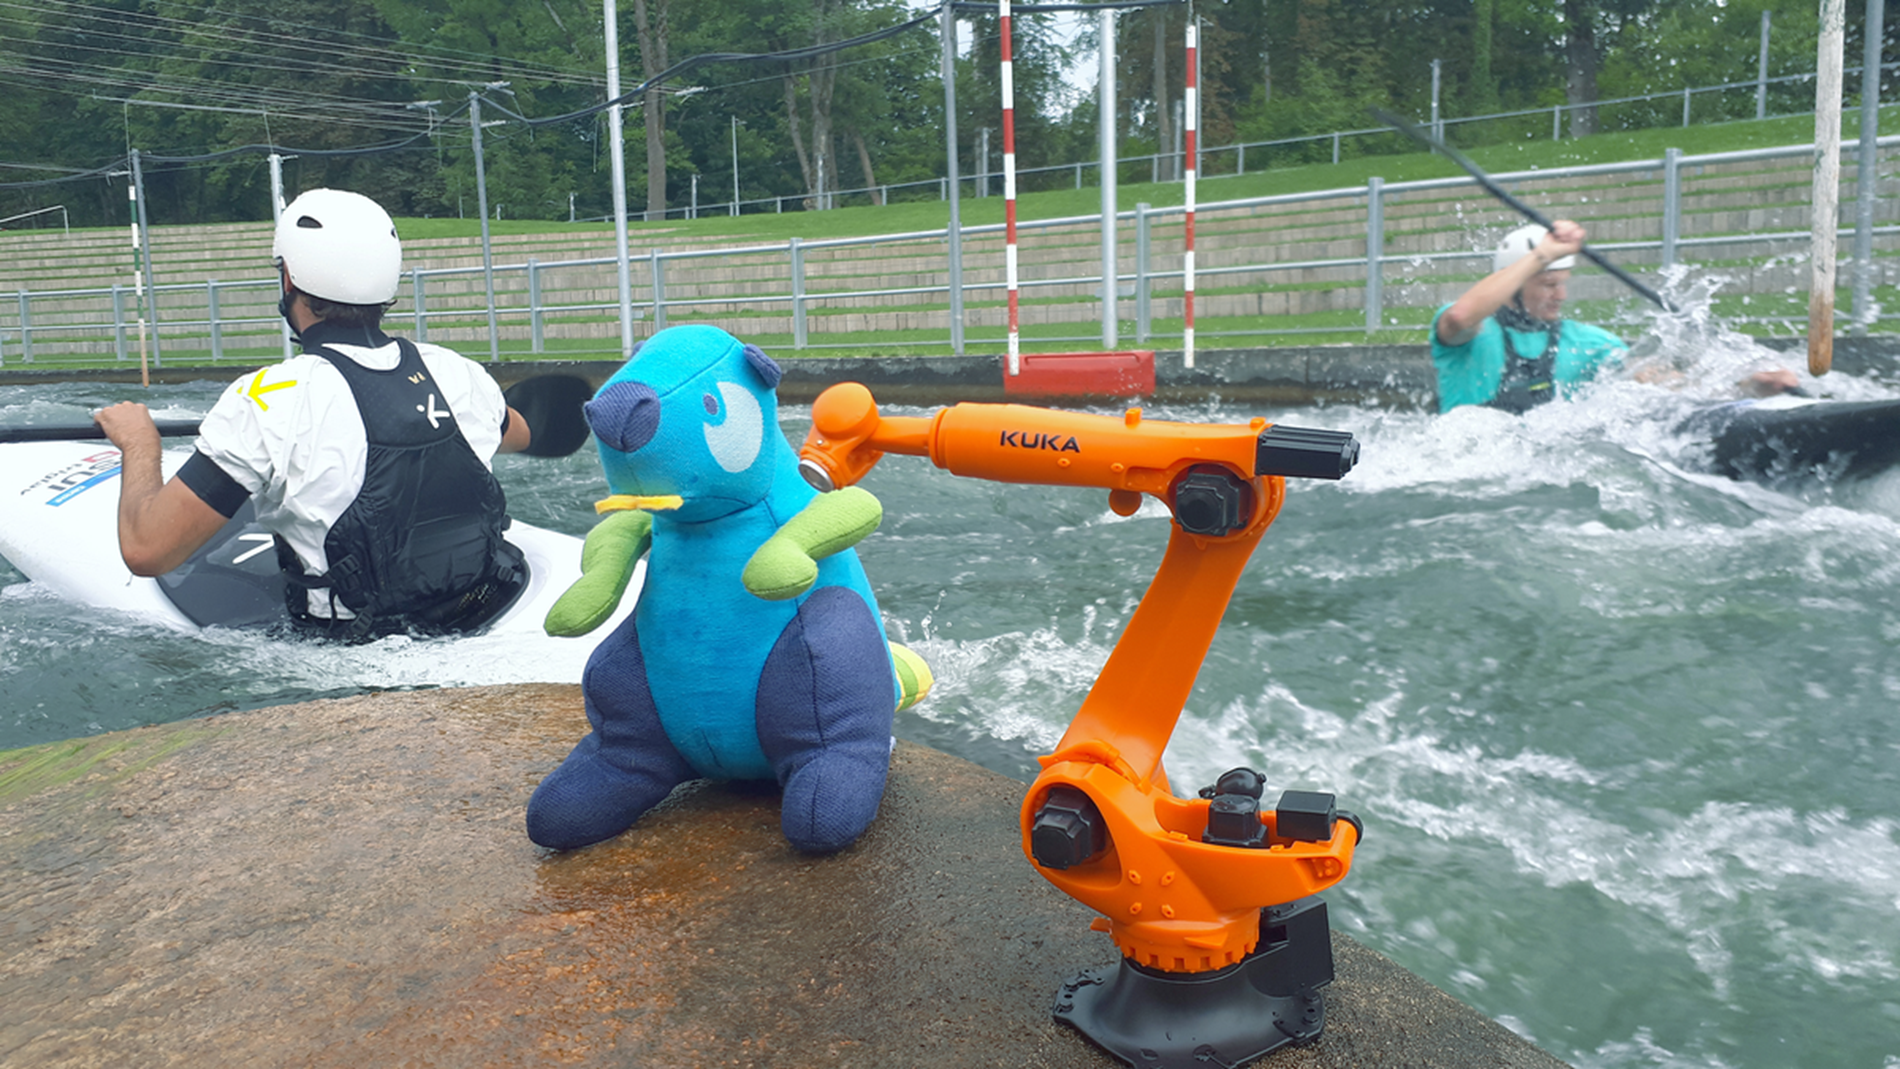 Gustl, the official mascot of the World Canoe Championships, and a KUKA robot model in front of two canoeists in Augsburg's Eiskanal.